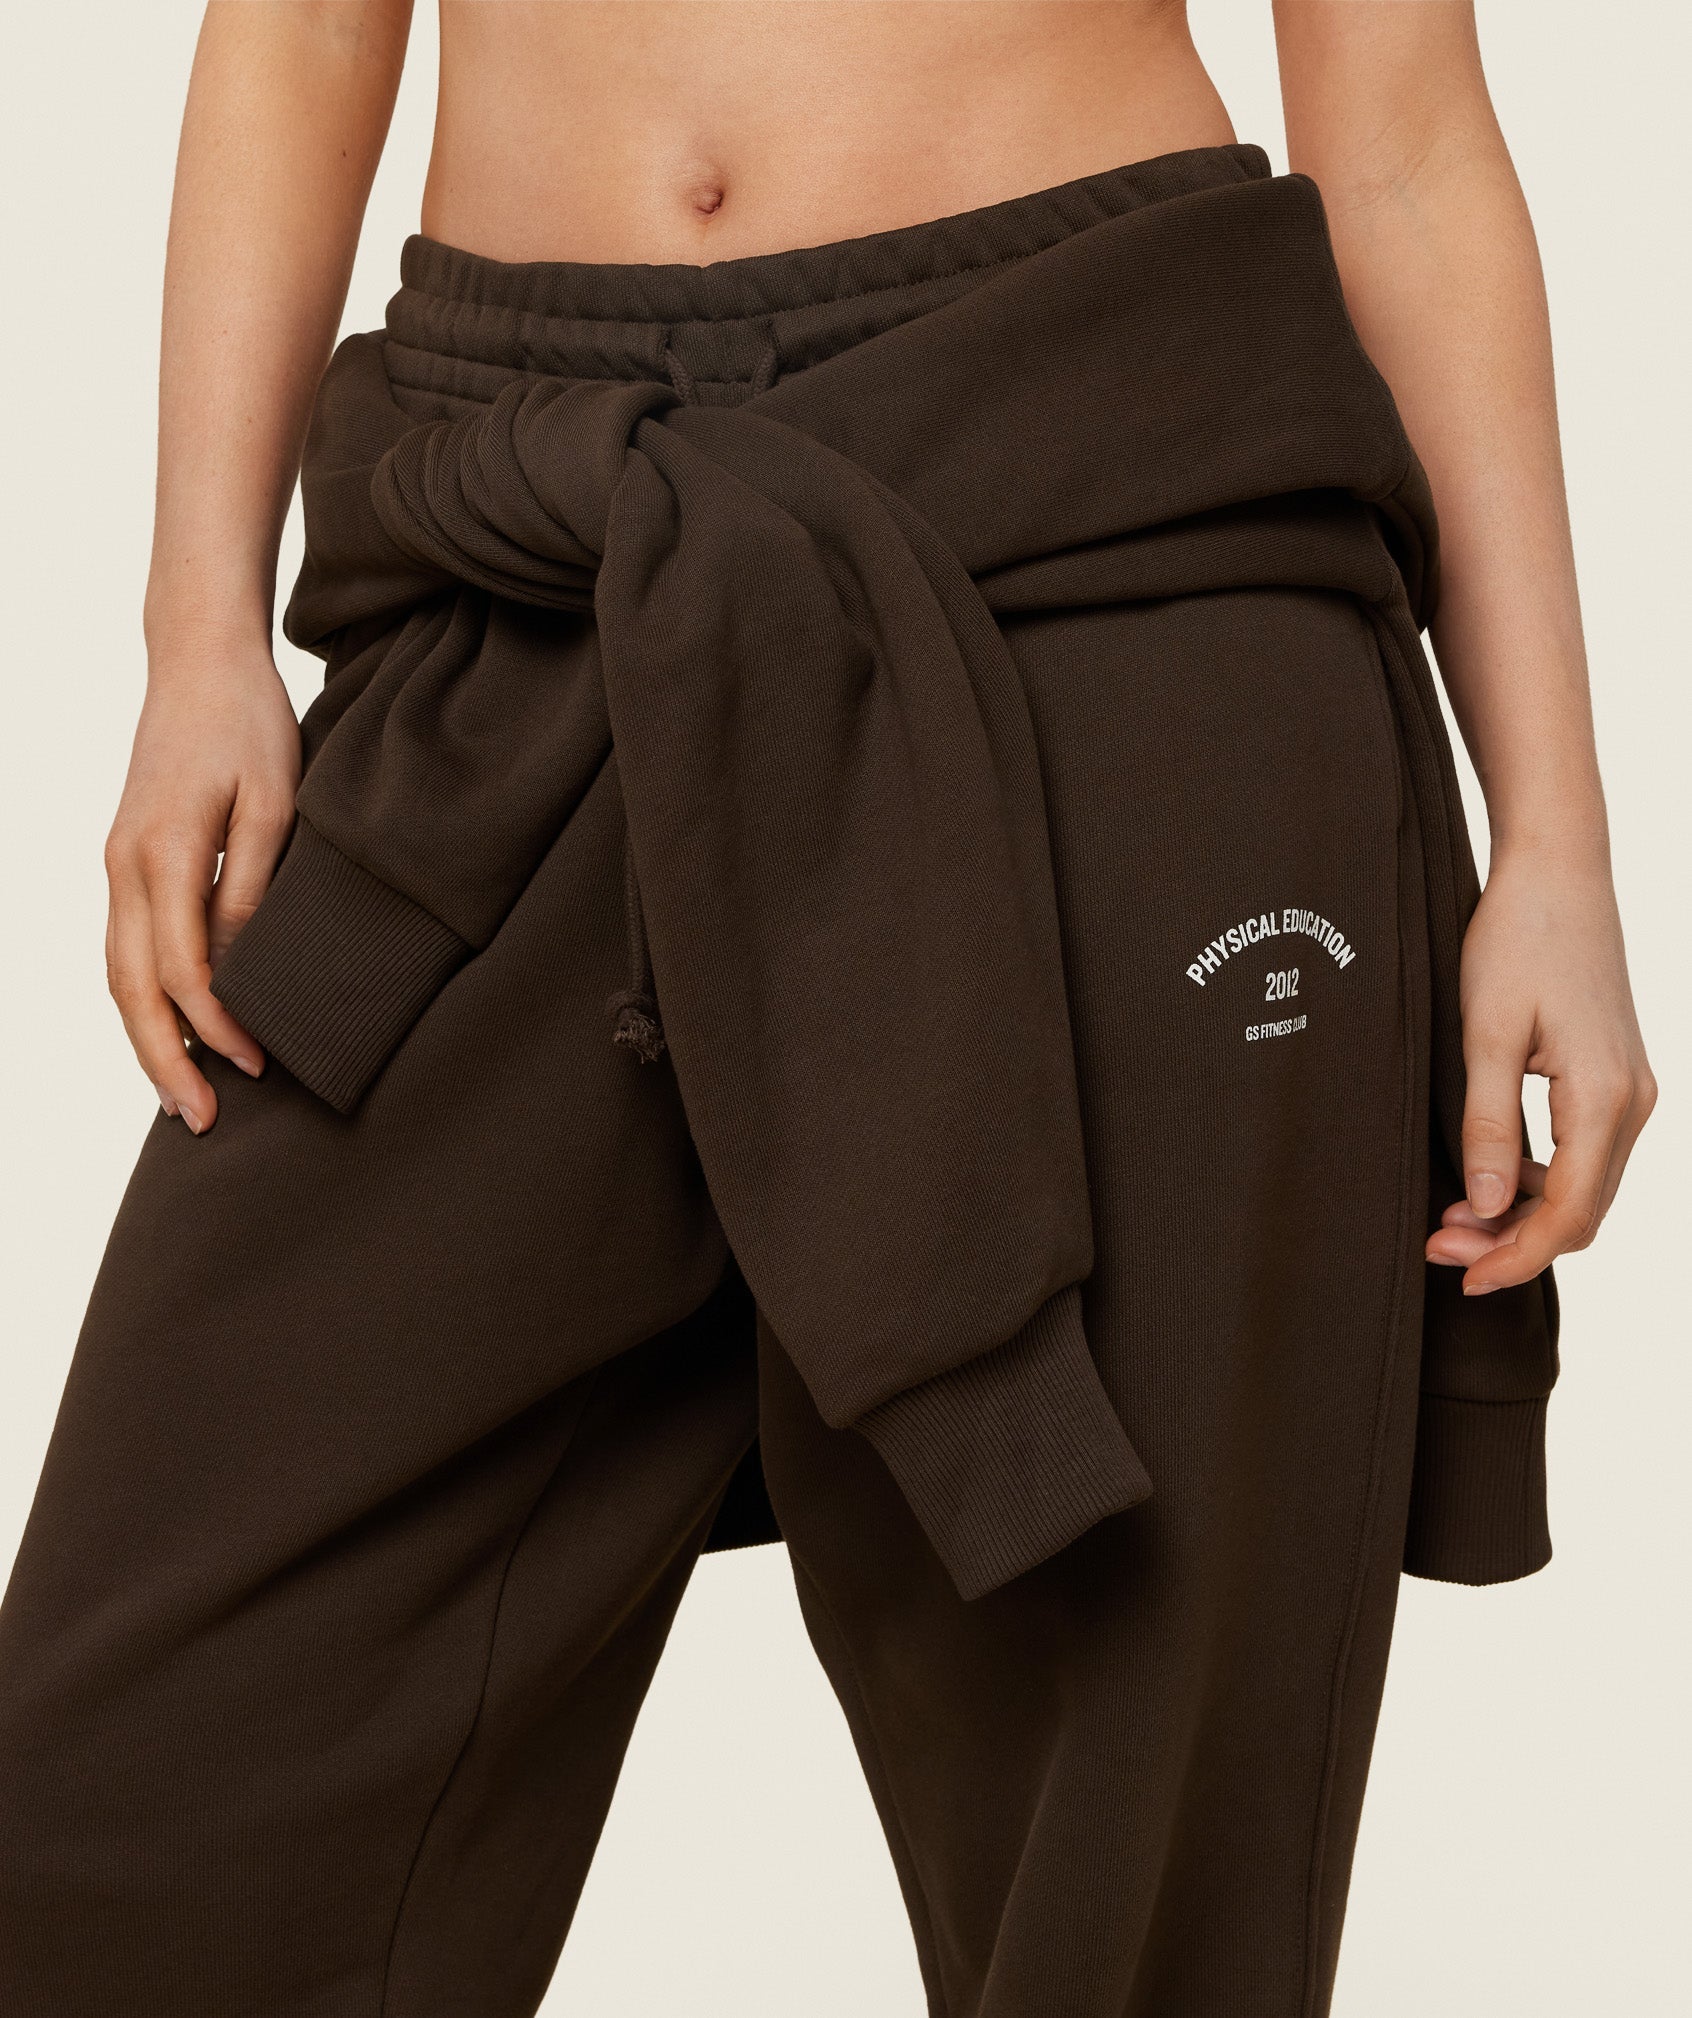 Phys Ed Graphic Sweatpants in Archive Brown - view 5